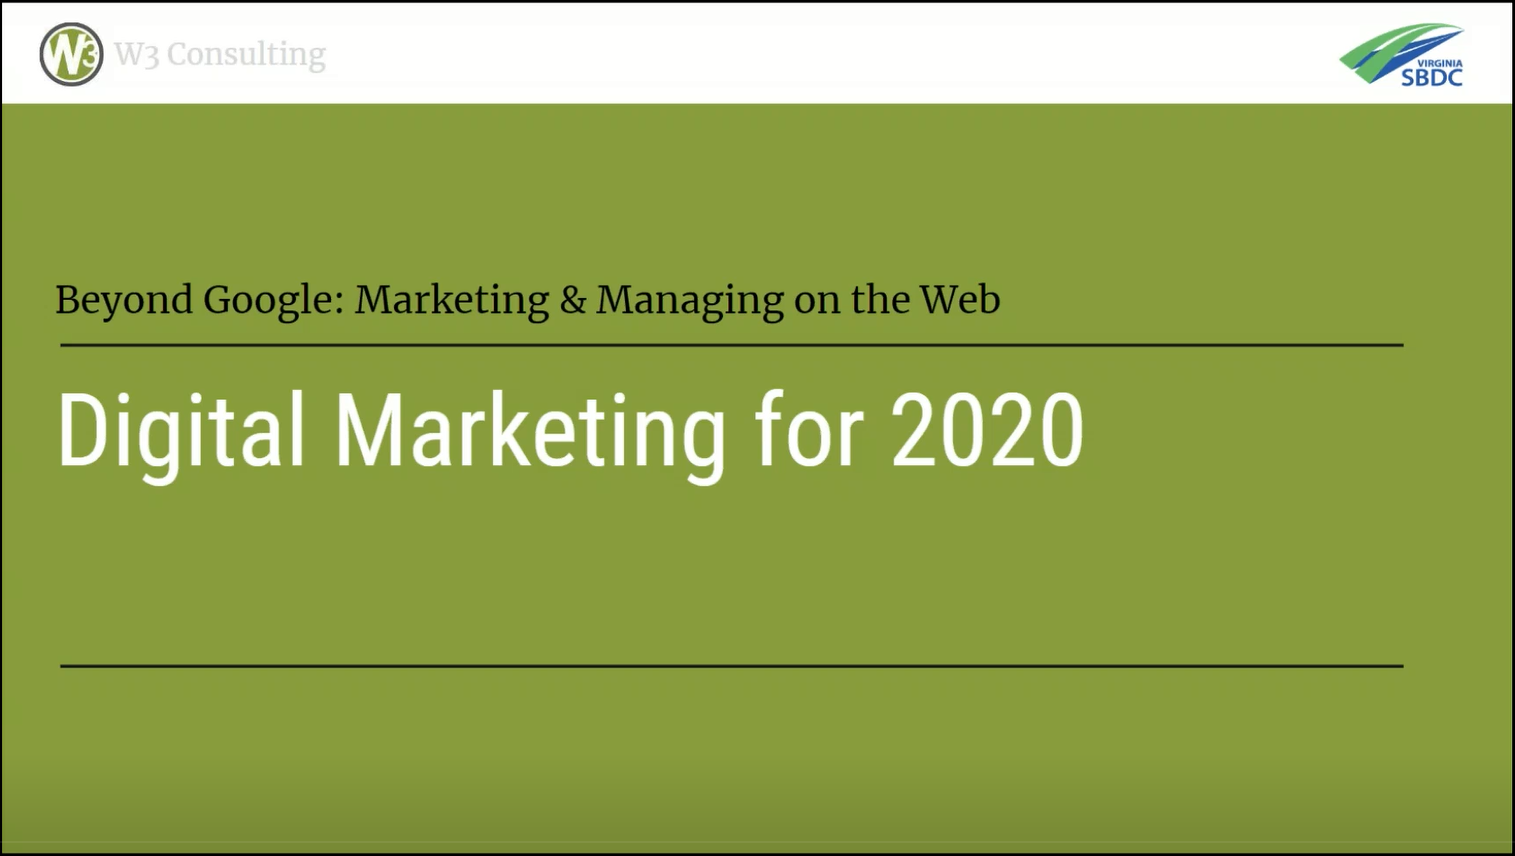 small business digital marketing trends for 2020